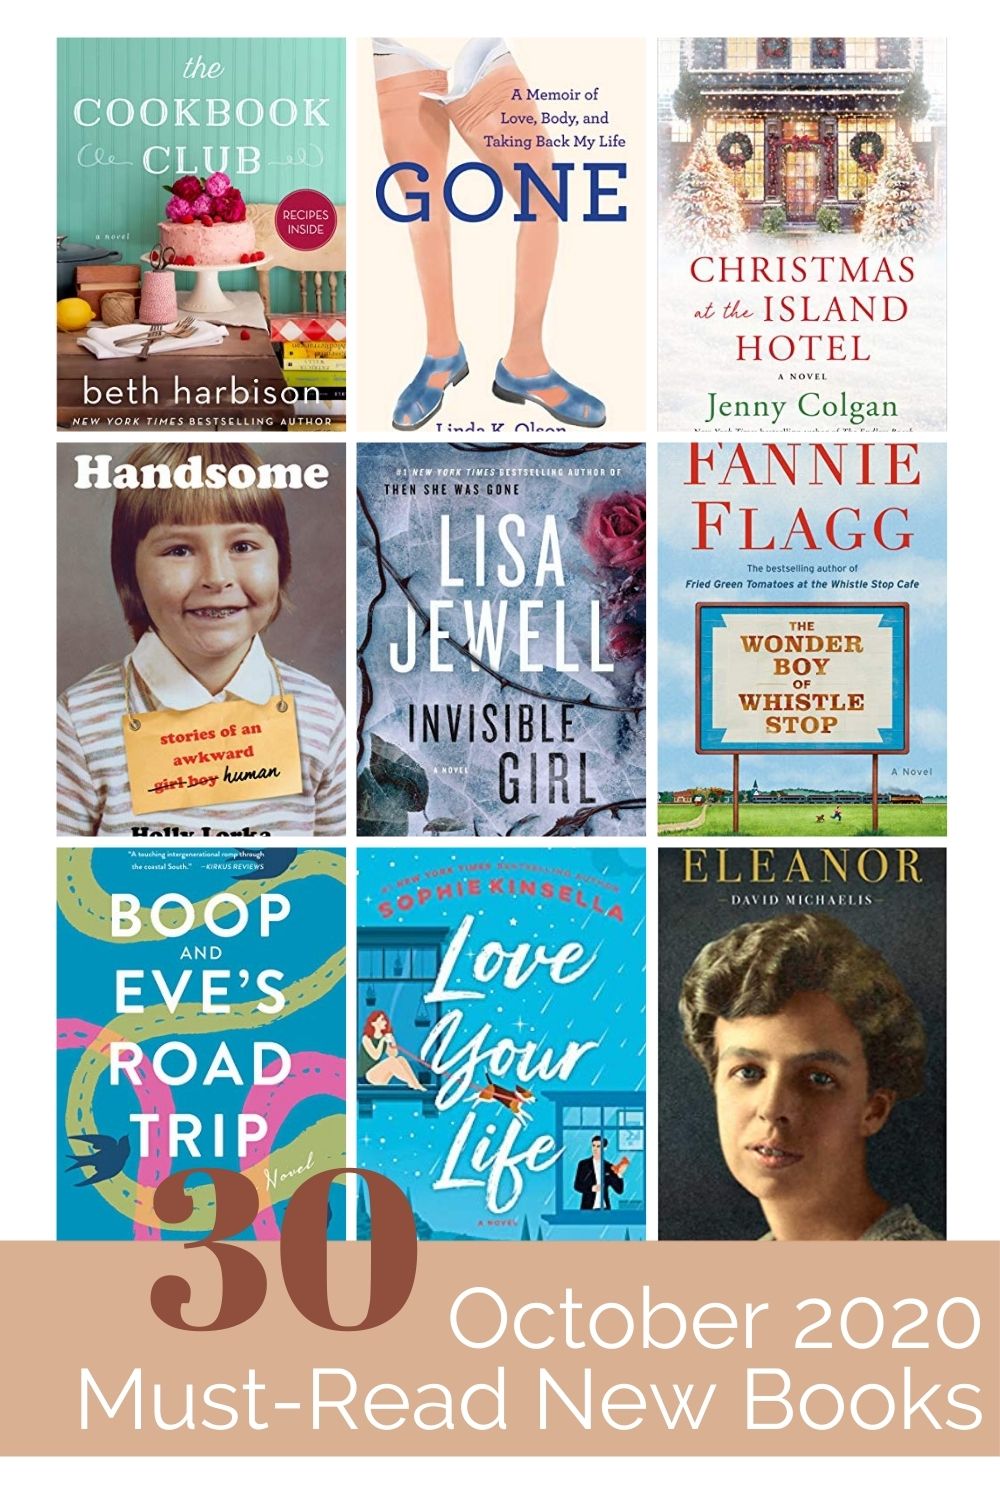 Incredible books coming out October 2020. New releases from debut authors and old favorites!